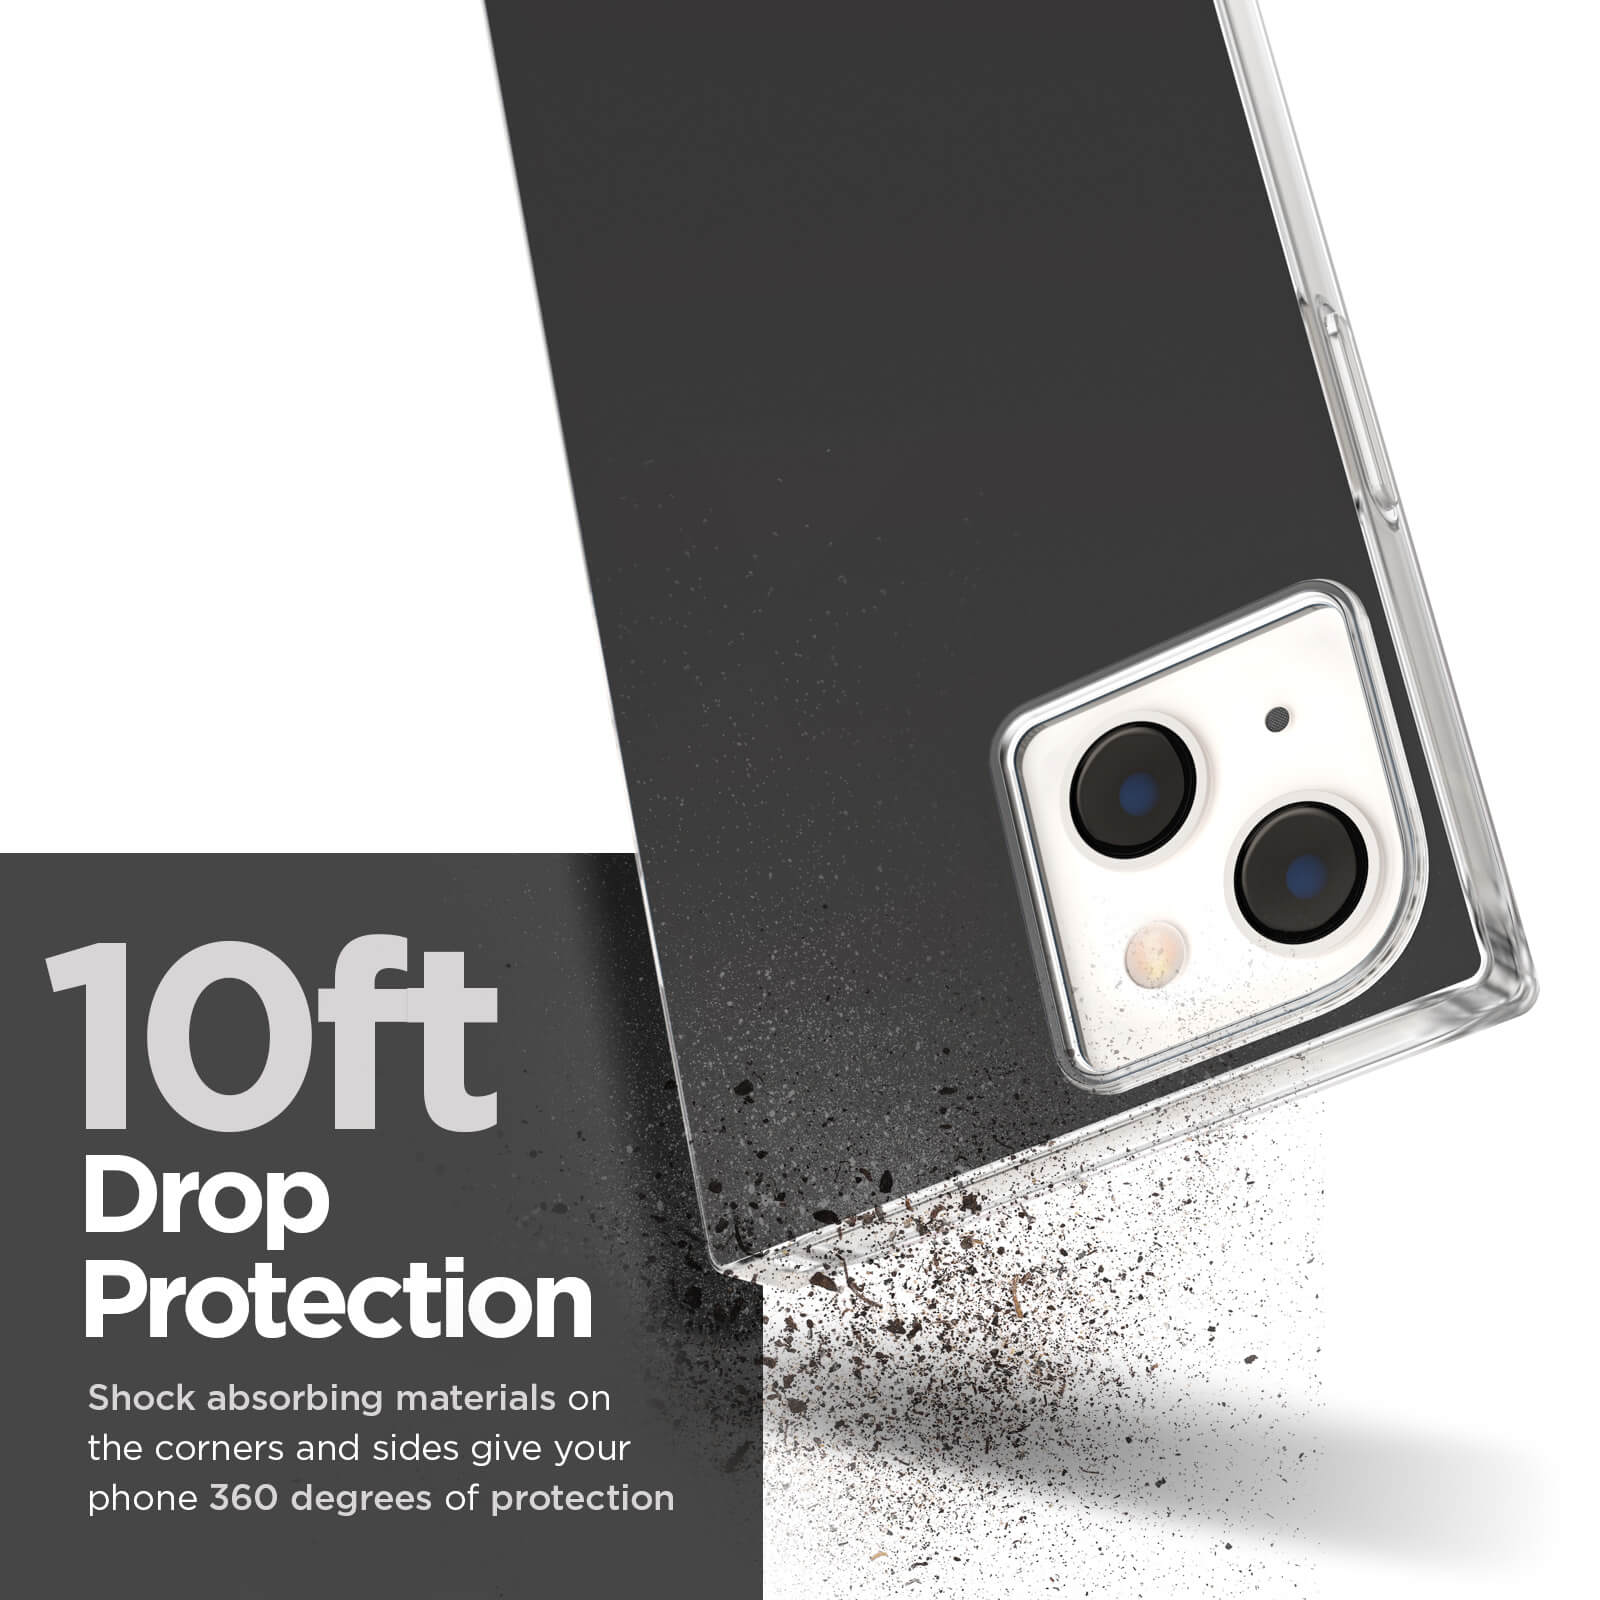 10ft drop protection. Shock absorbing materials ont he corners and sides give your phone 360 degrees of protection. color::Black